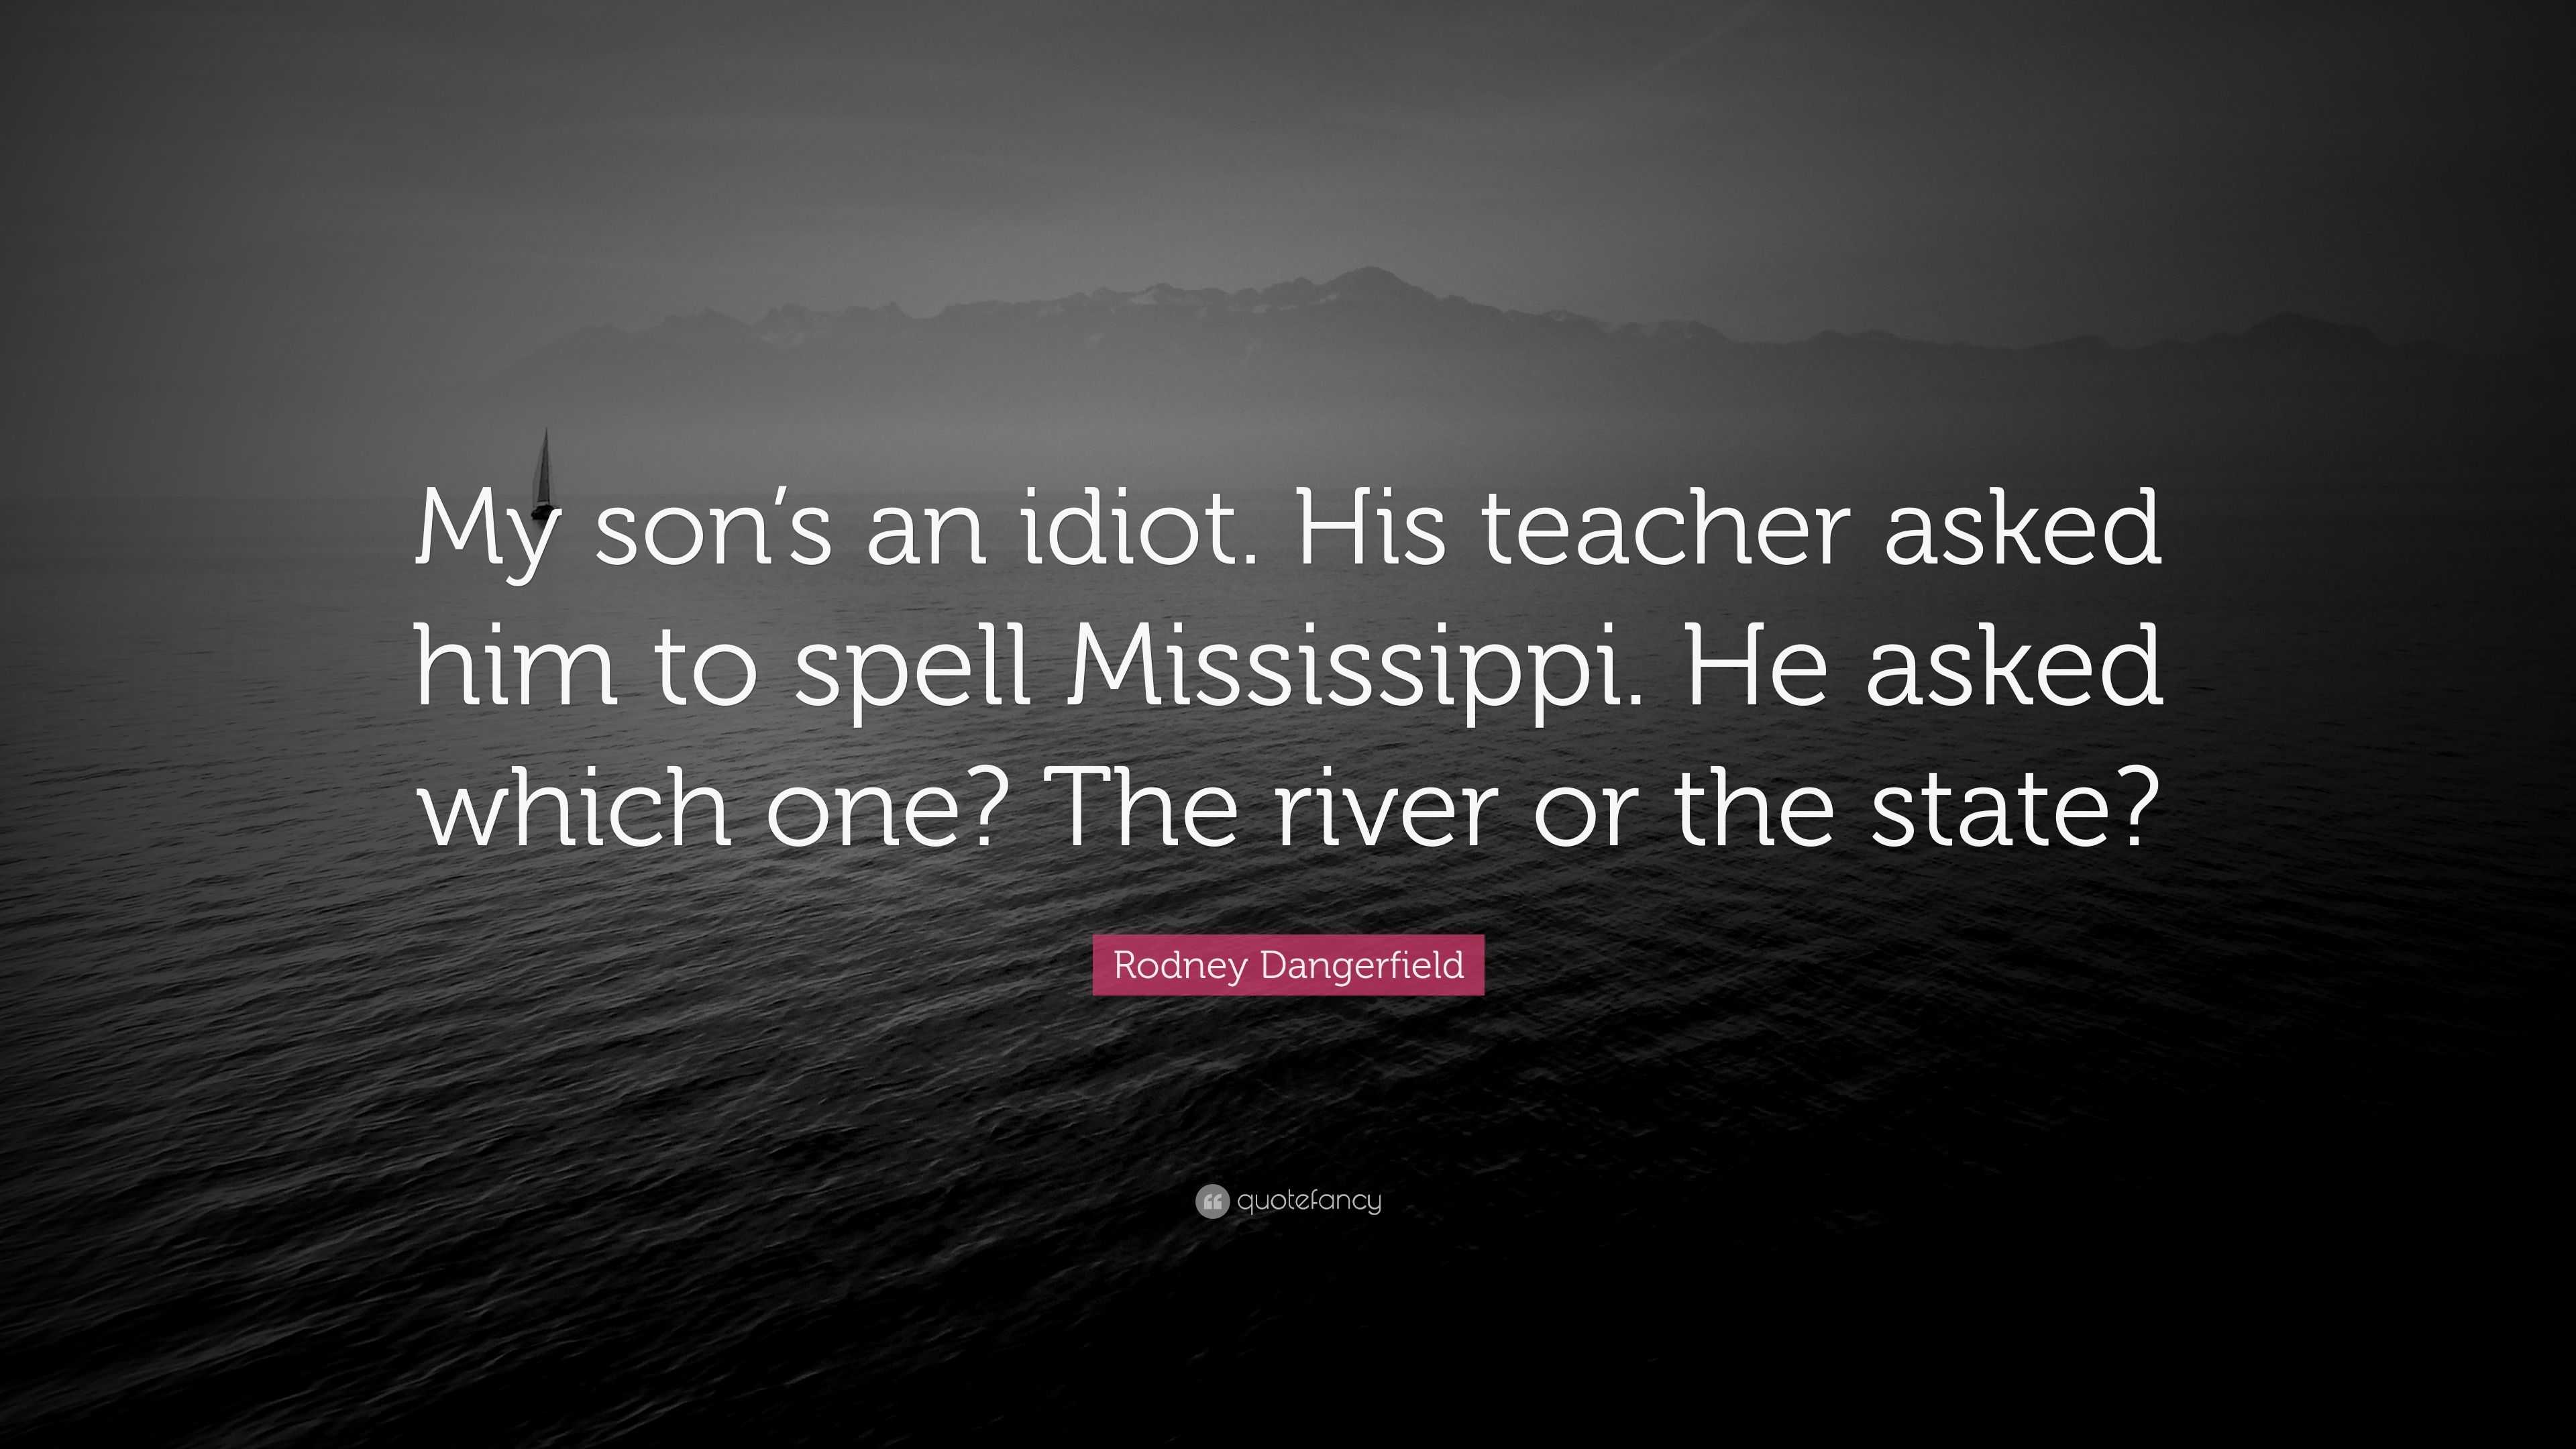 Rodney Dangerfield Quote: “My son's an idiot. His teacher asked him to  spell Mississippi. He asked